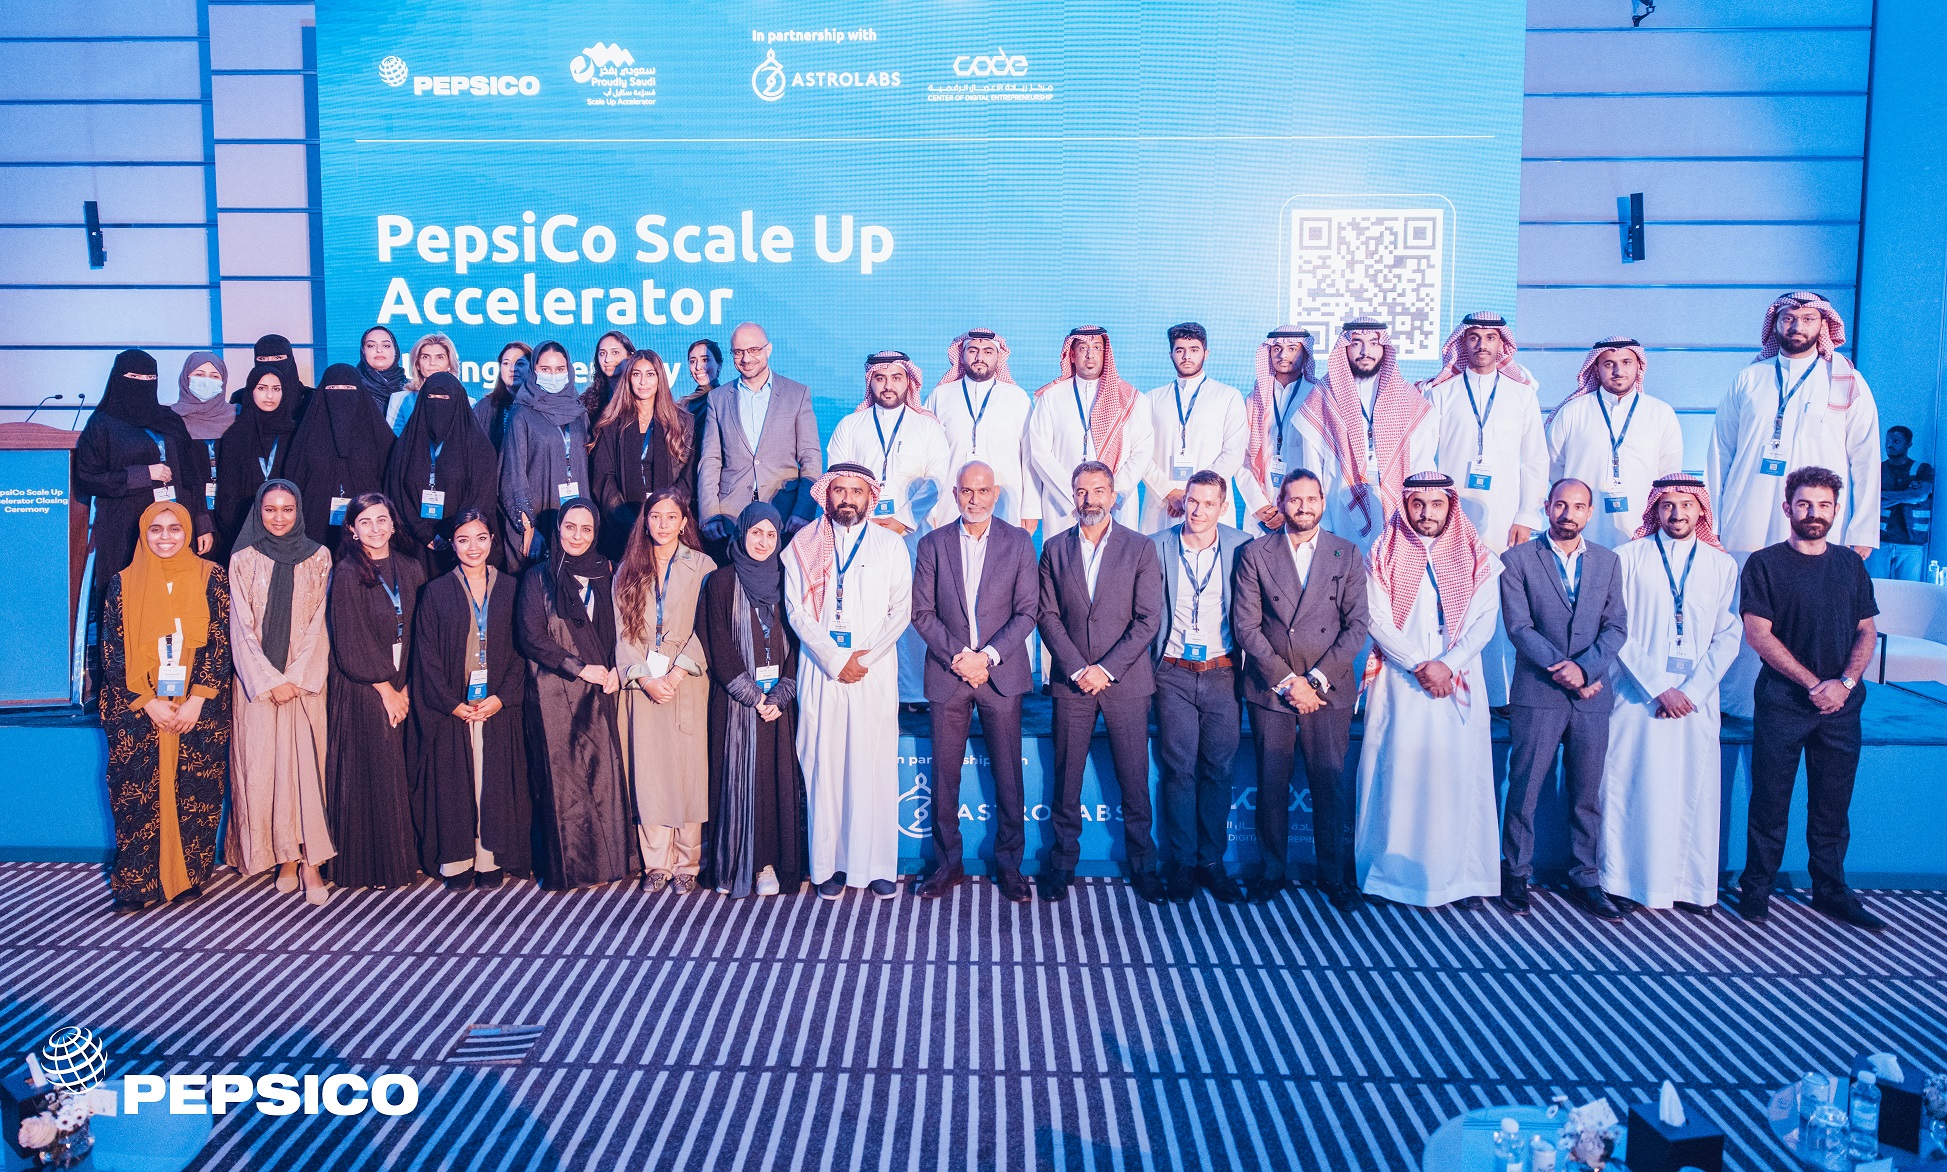 PepsiCo Scale Up Accelerator Program group picture